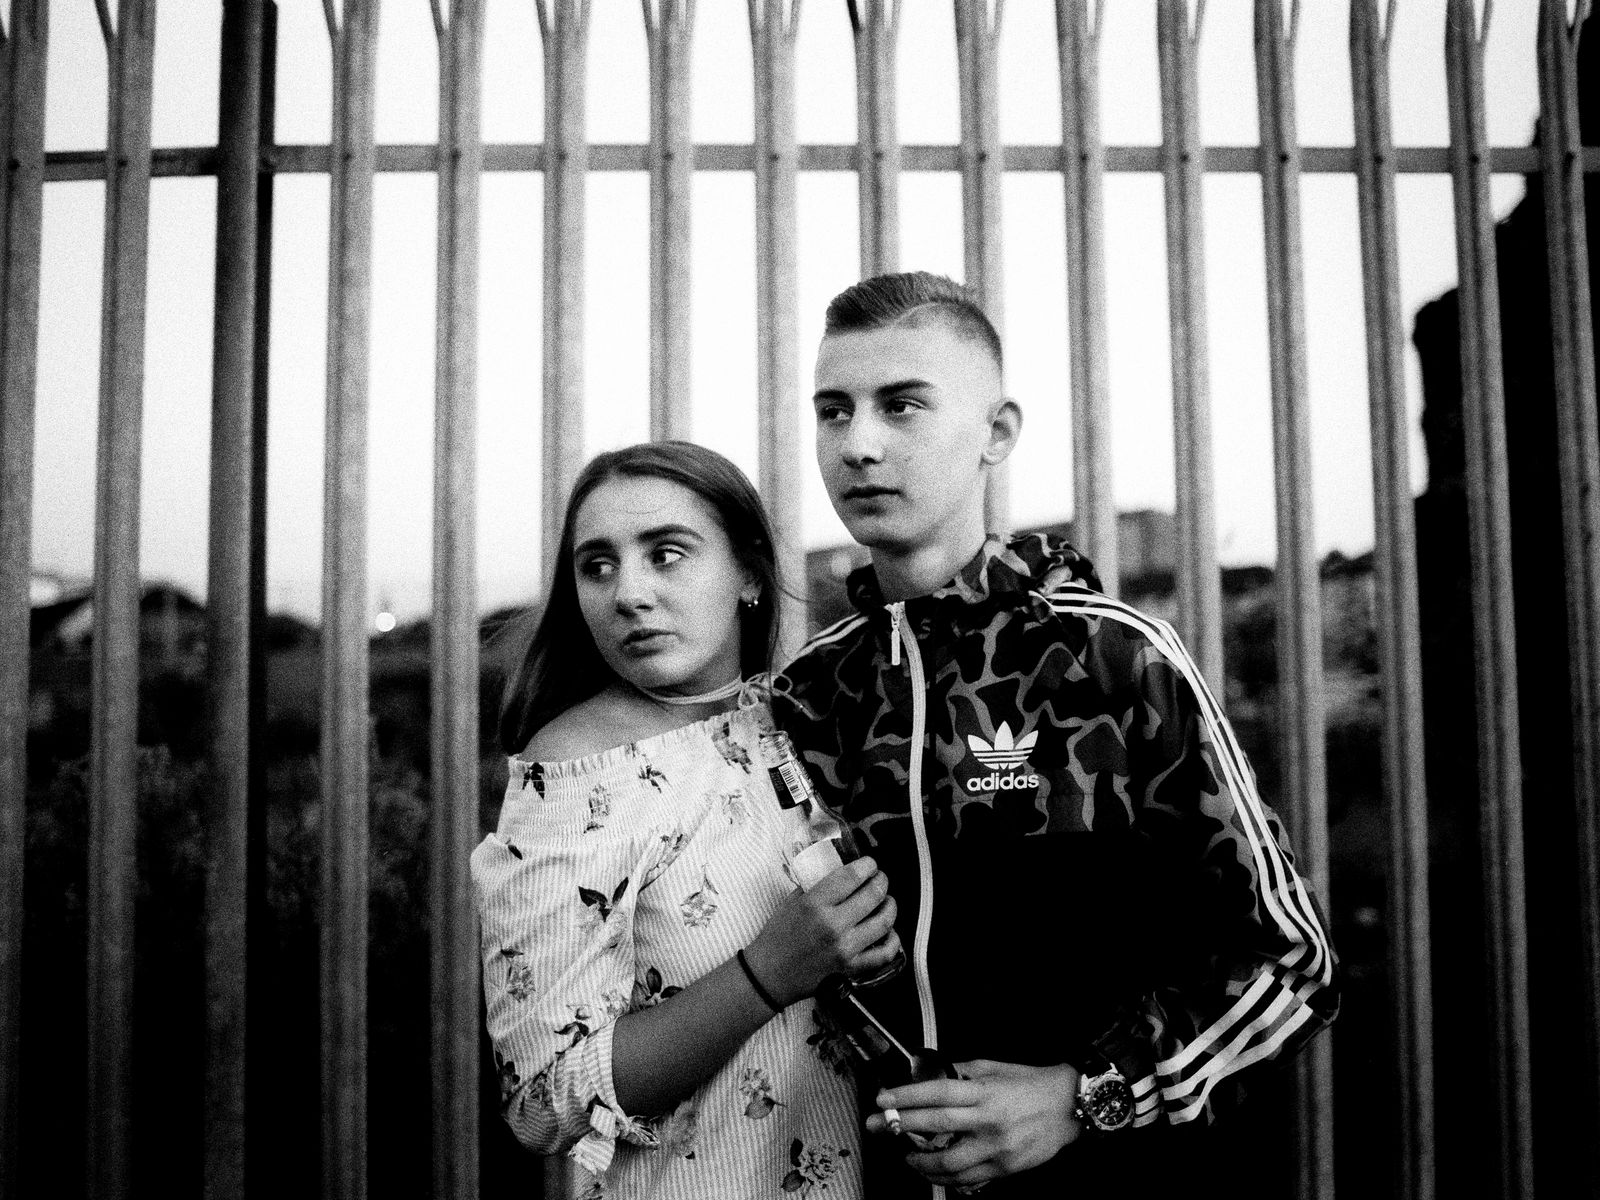 © Toby Binder - Image from the WEE MUCKERS – Youth of Belfast photography project